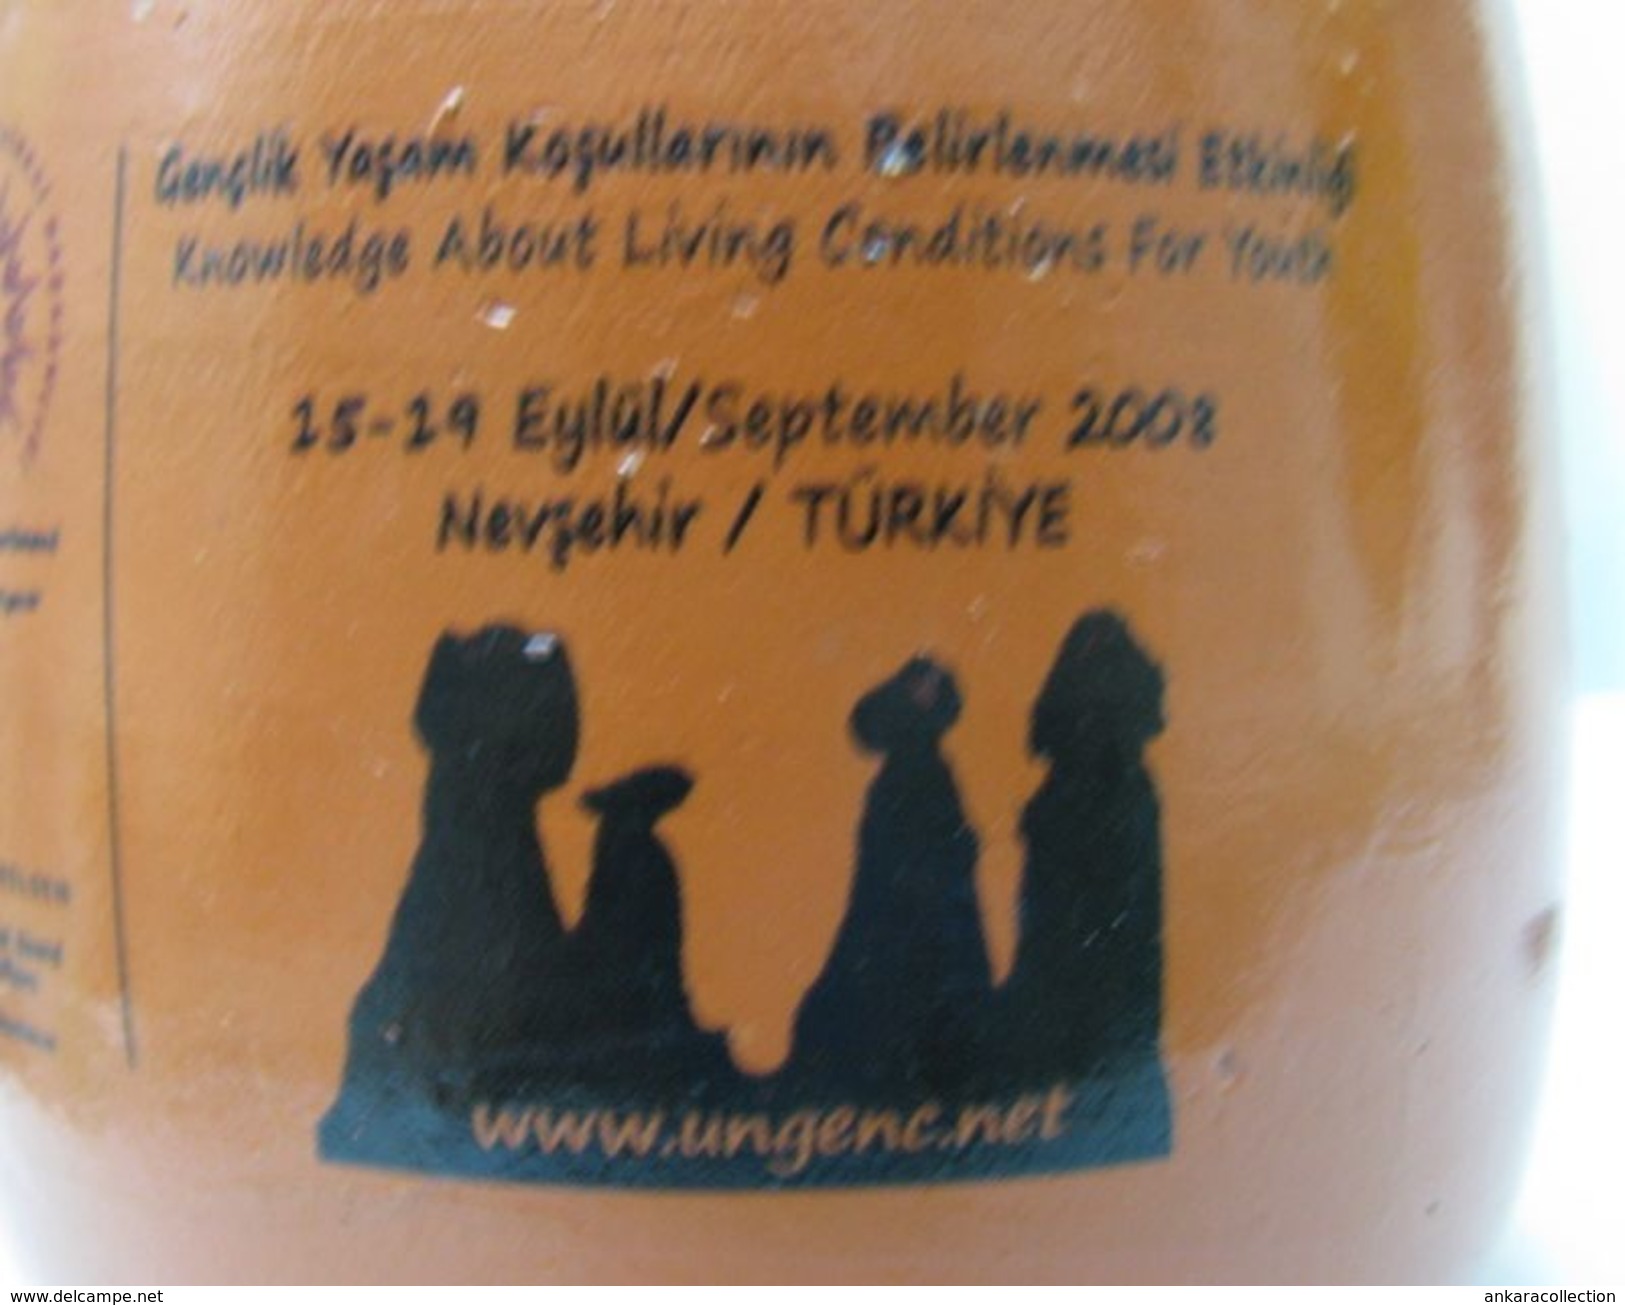 AC-  KNOWLEDGE ABOUT LIVING CONDITIONS FOR YOUTH 15 - 19 SEPTEMBER 2008 NEVSEHIR TURKEY SWEDISH NATIONAL BOARD FOR YOUTH - Tassen